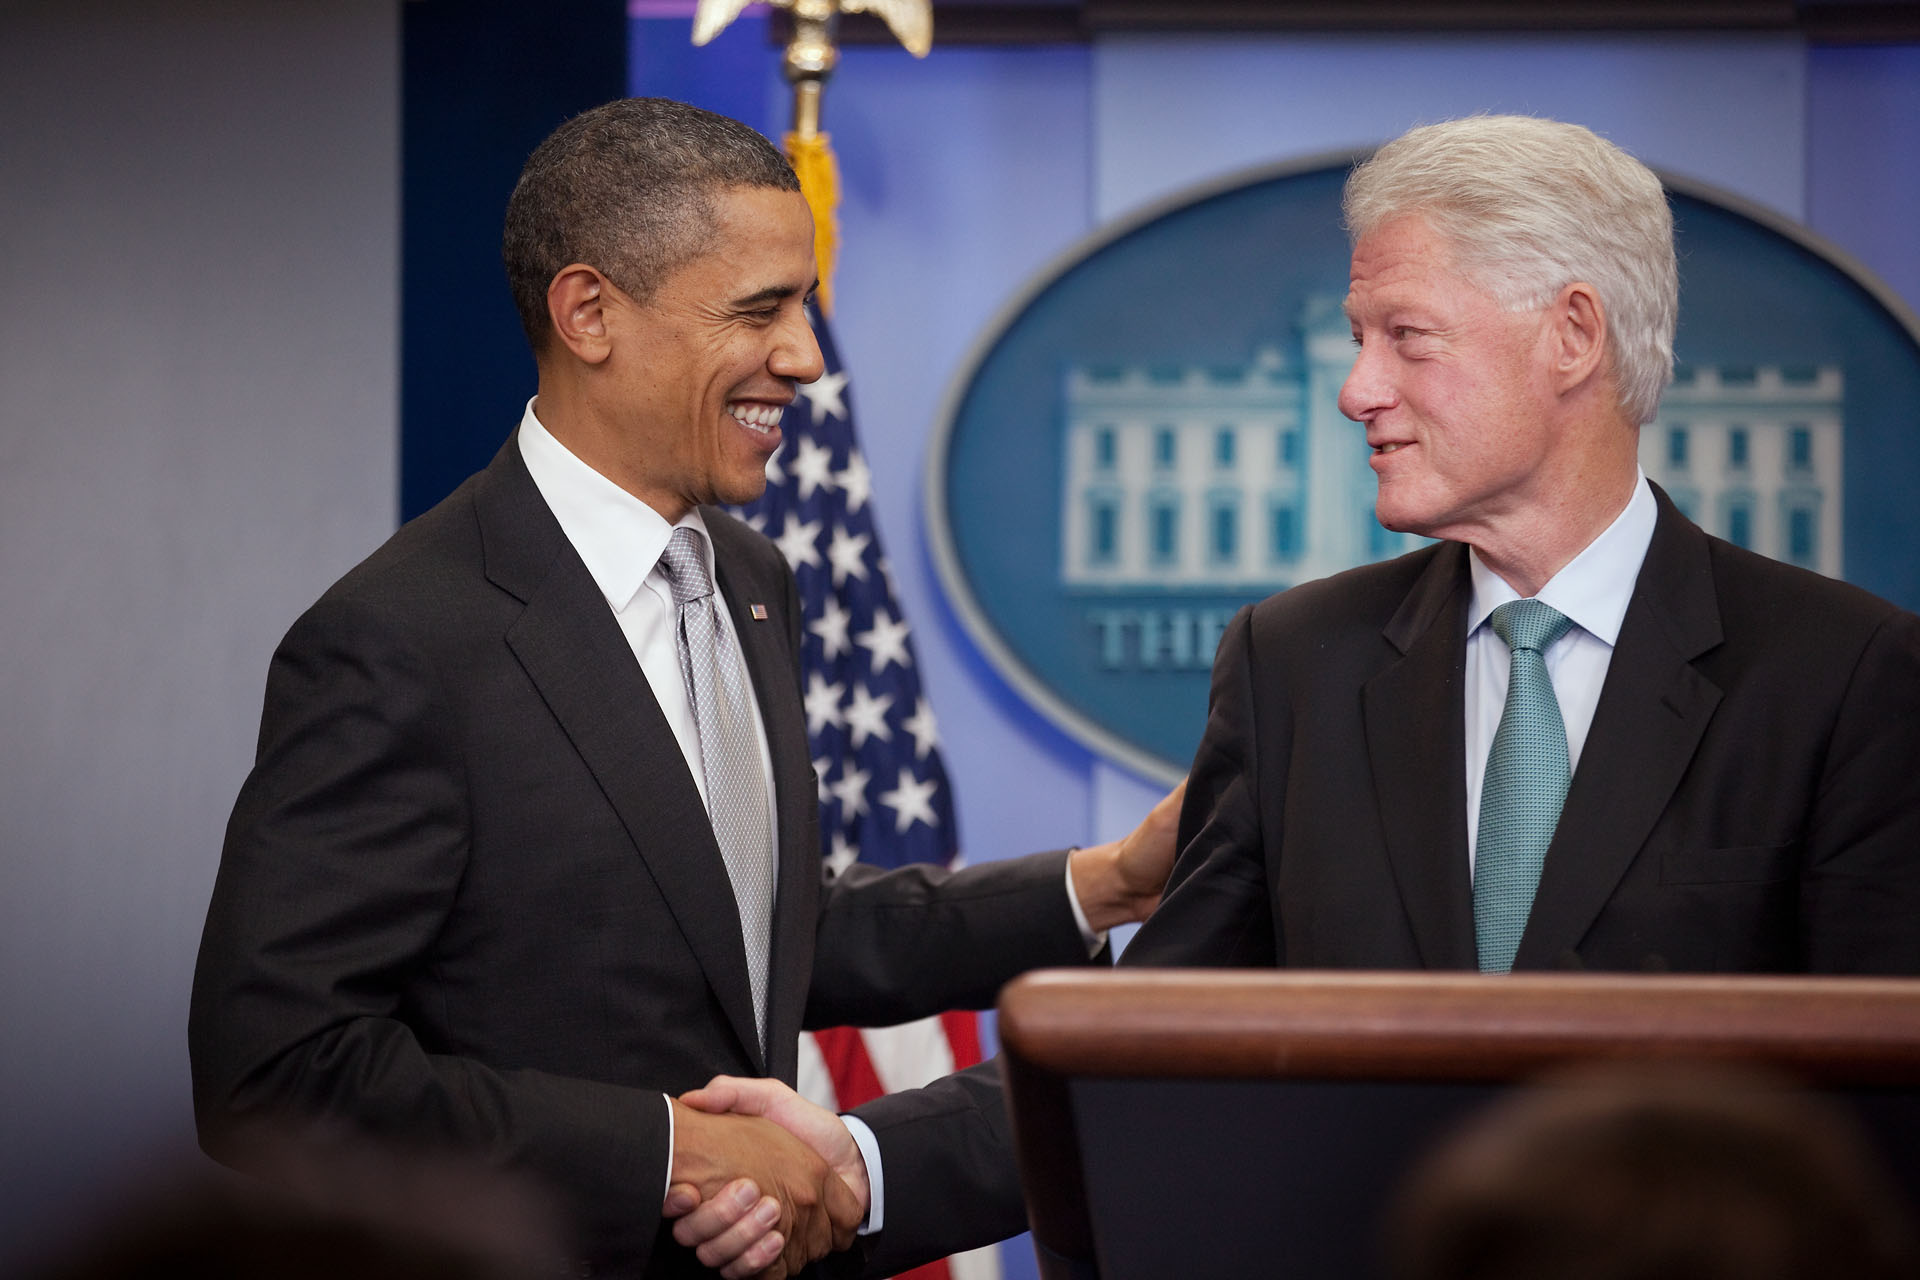 President Obama & President Clinton Shake Hands Before Discussing Tax Cuts, Unemployment Insurance & Jobs